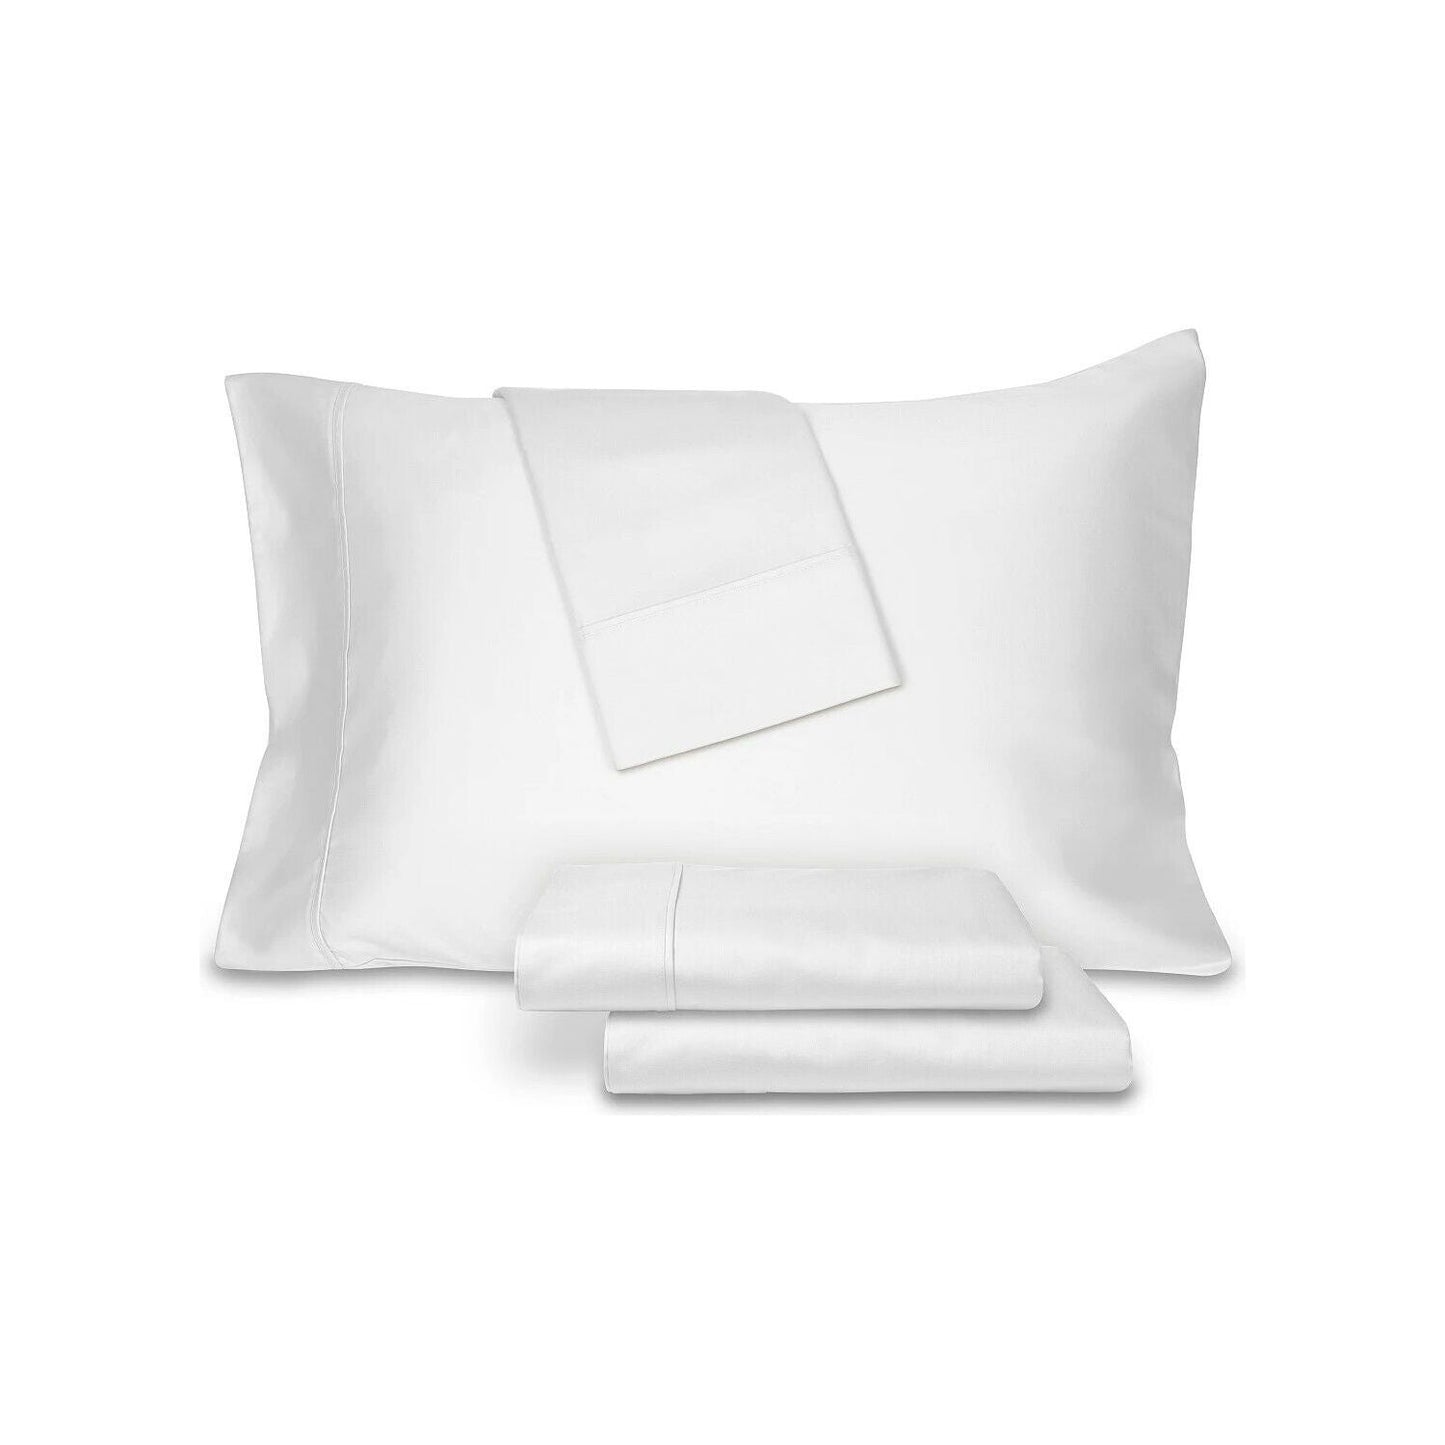 Ultra Lux Cotton 800 Thread Count 4 Pc. Sheet Set, Queen, White, Size: Queen